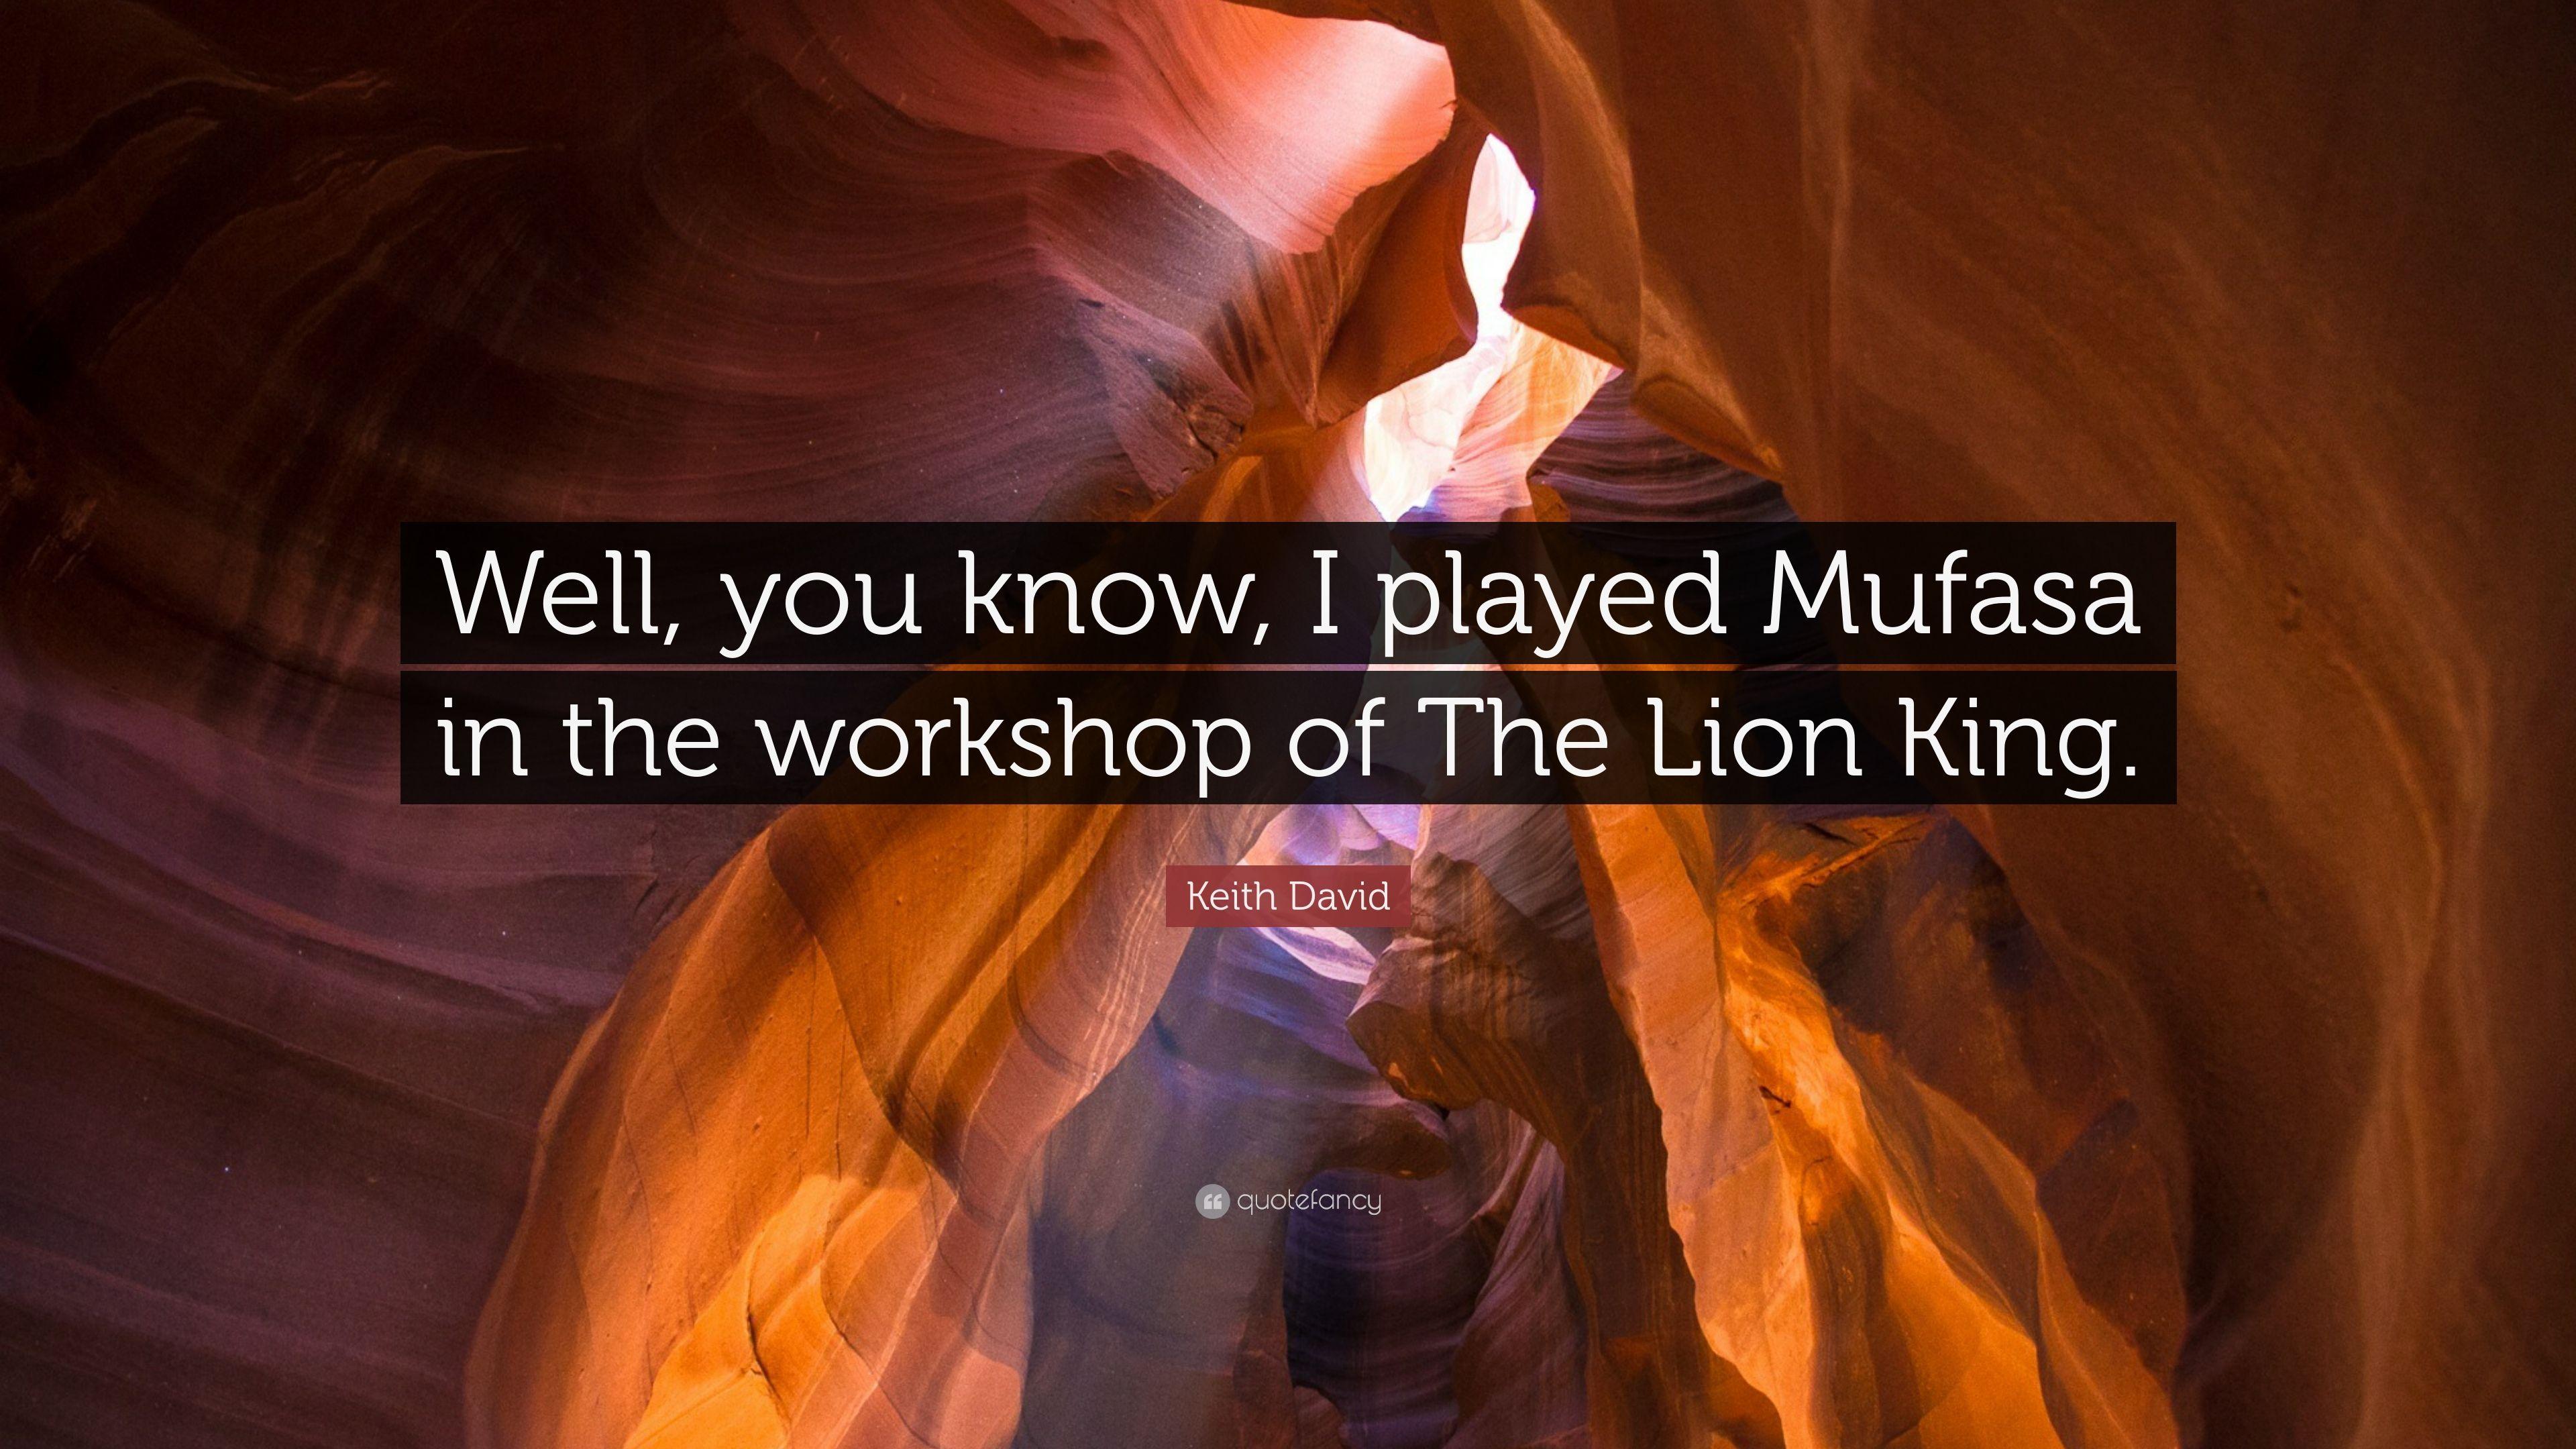 Keith David Quote: “Well, you know, I played Mufasa in the workshop